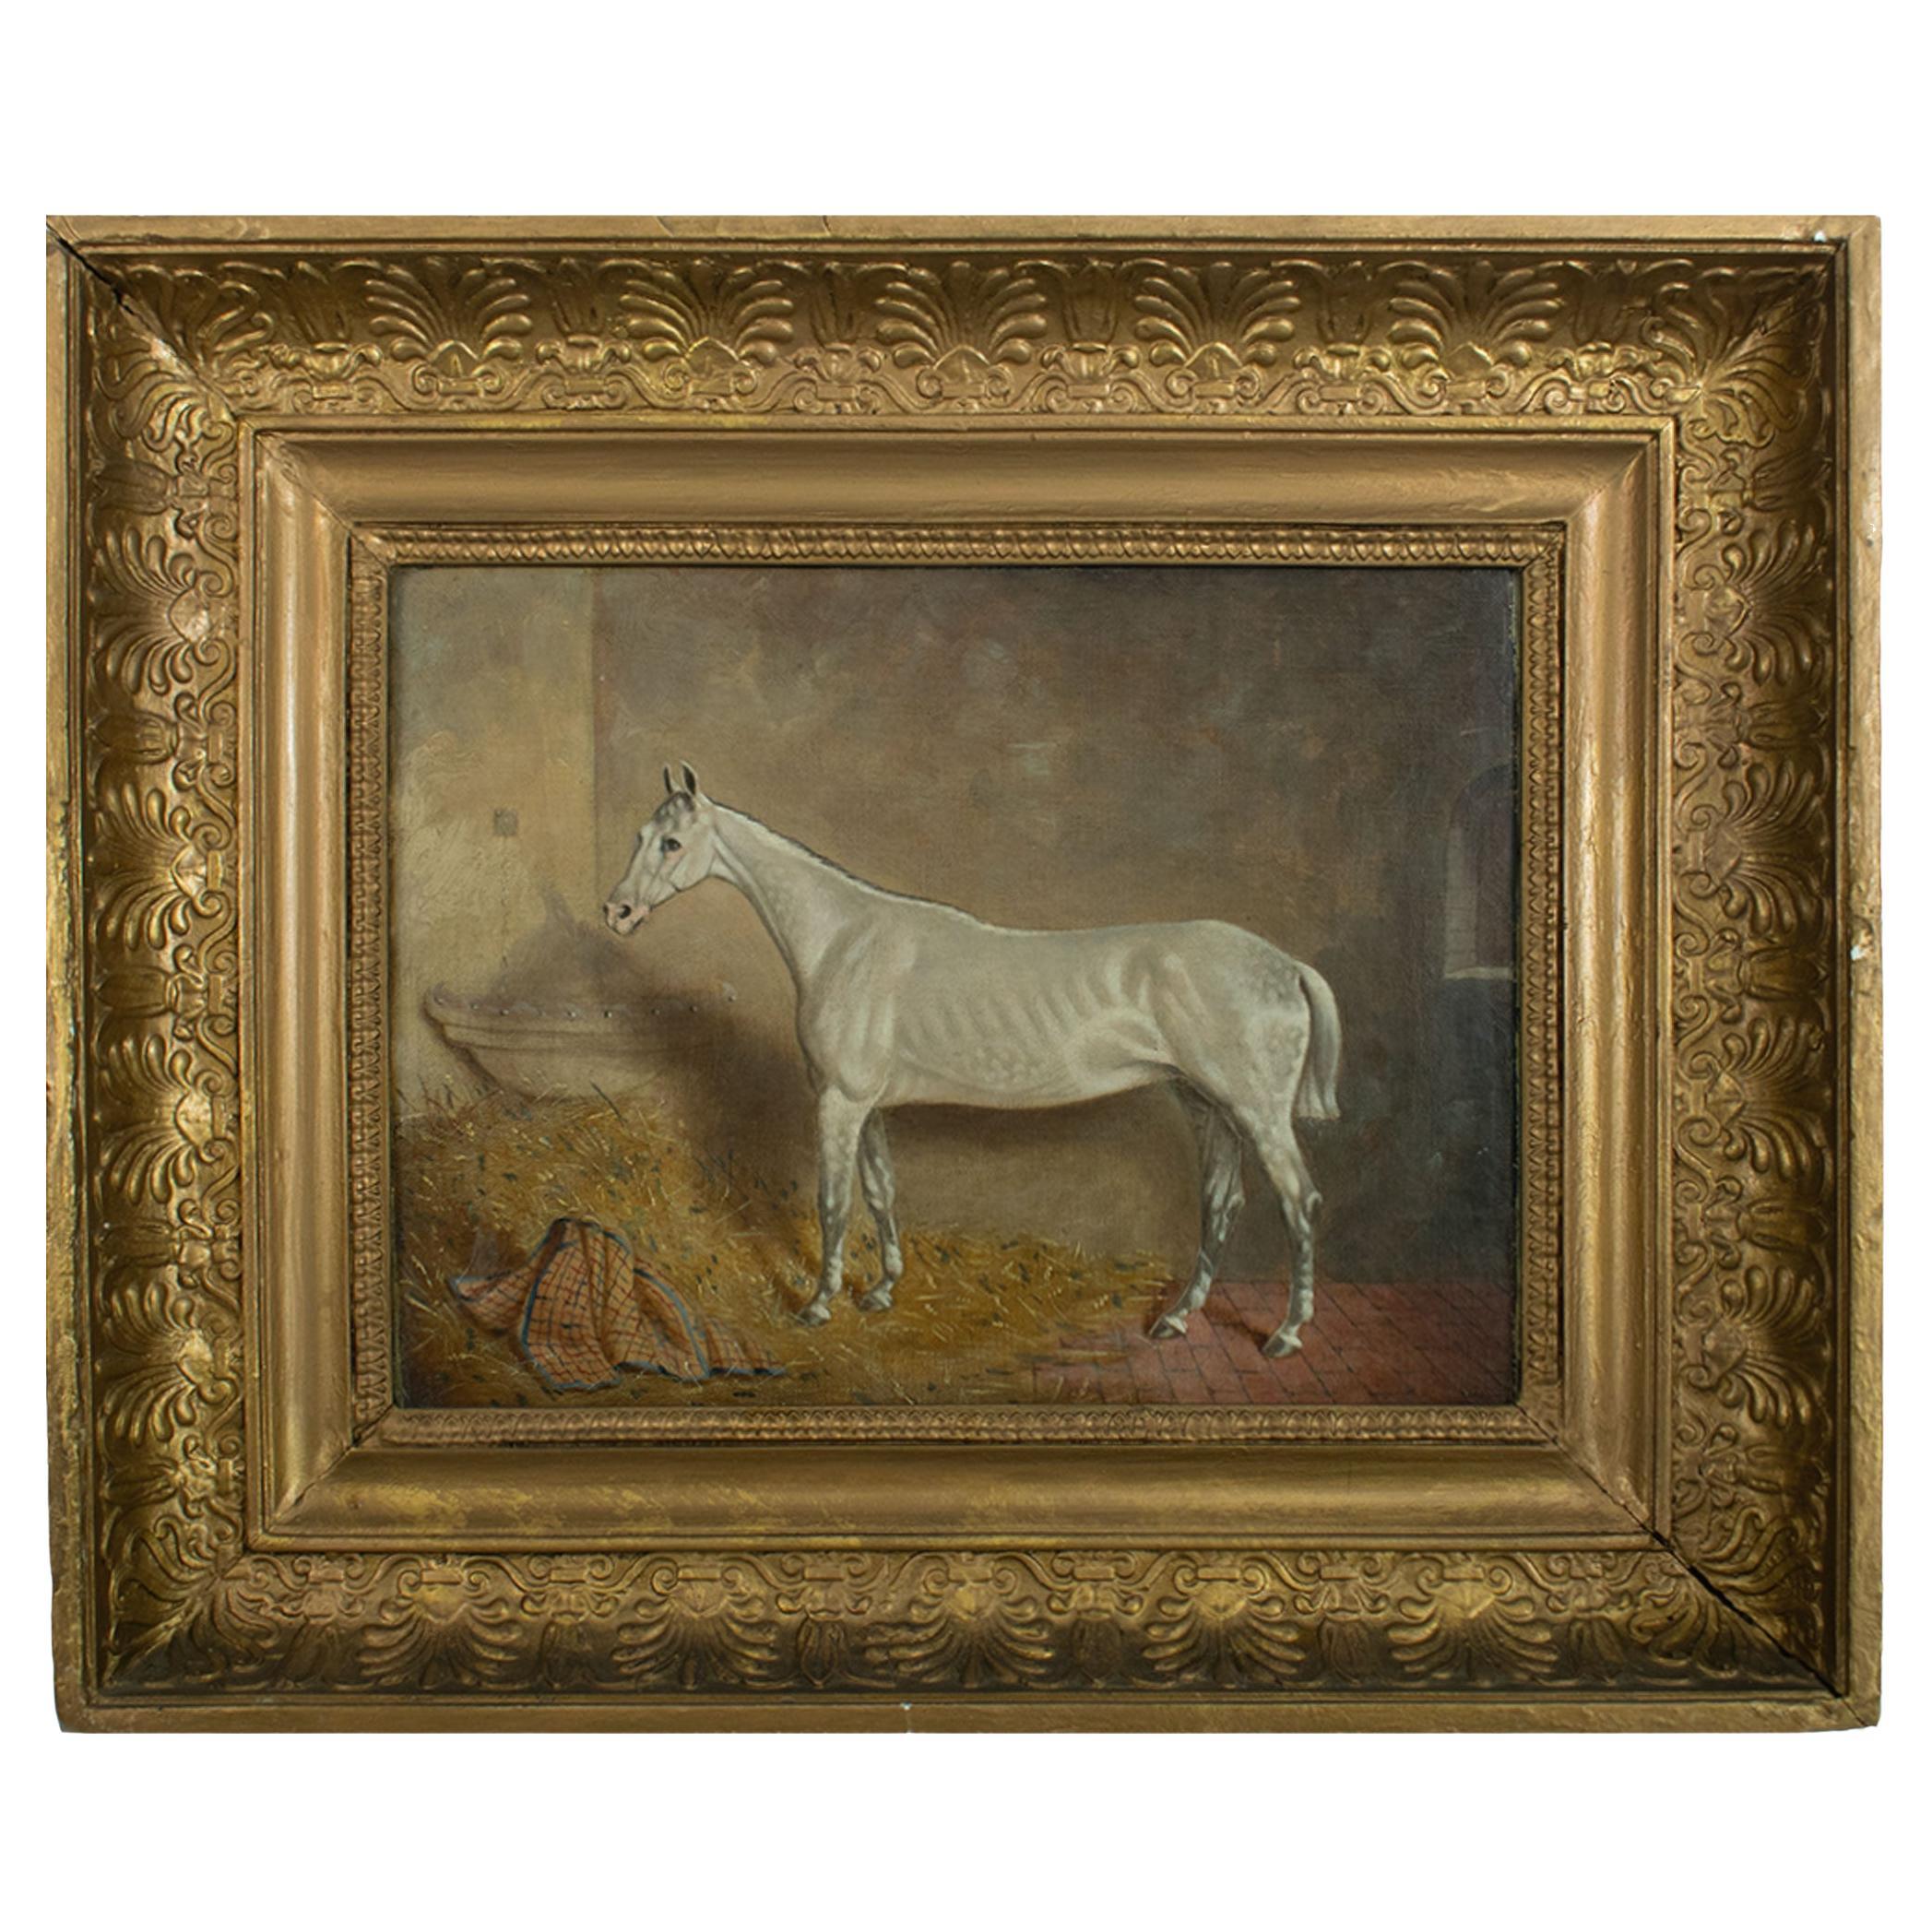 J Truman, dated 1870, Portrait of a White Horse in its Stable, Signed For Sale